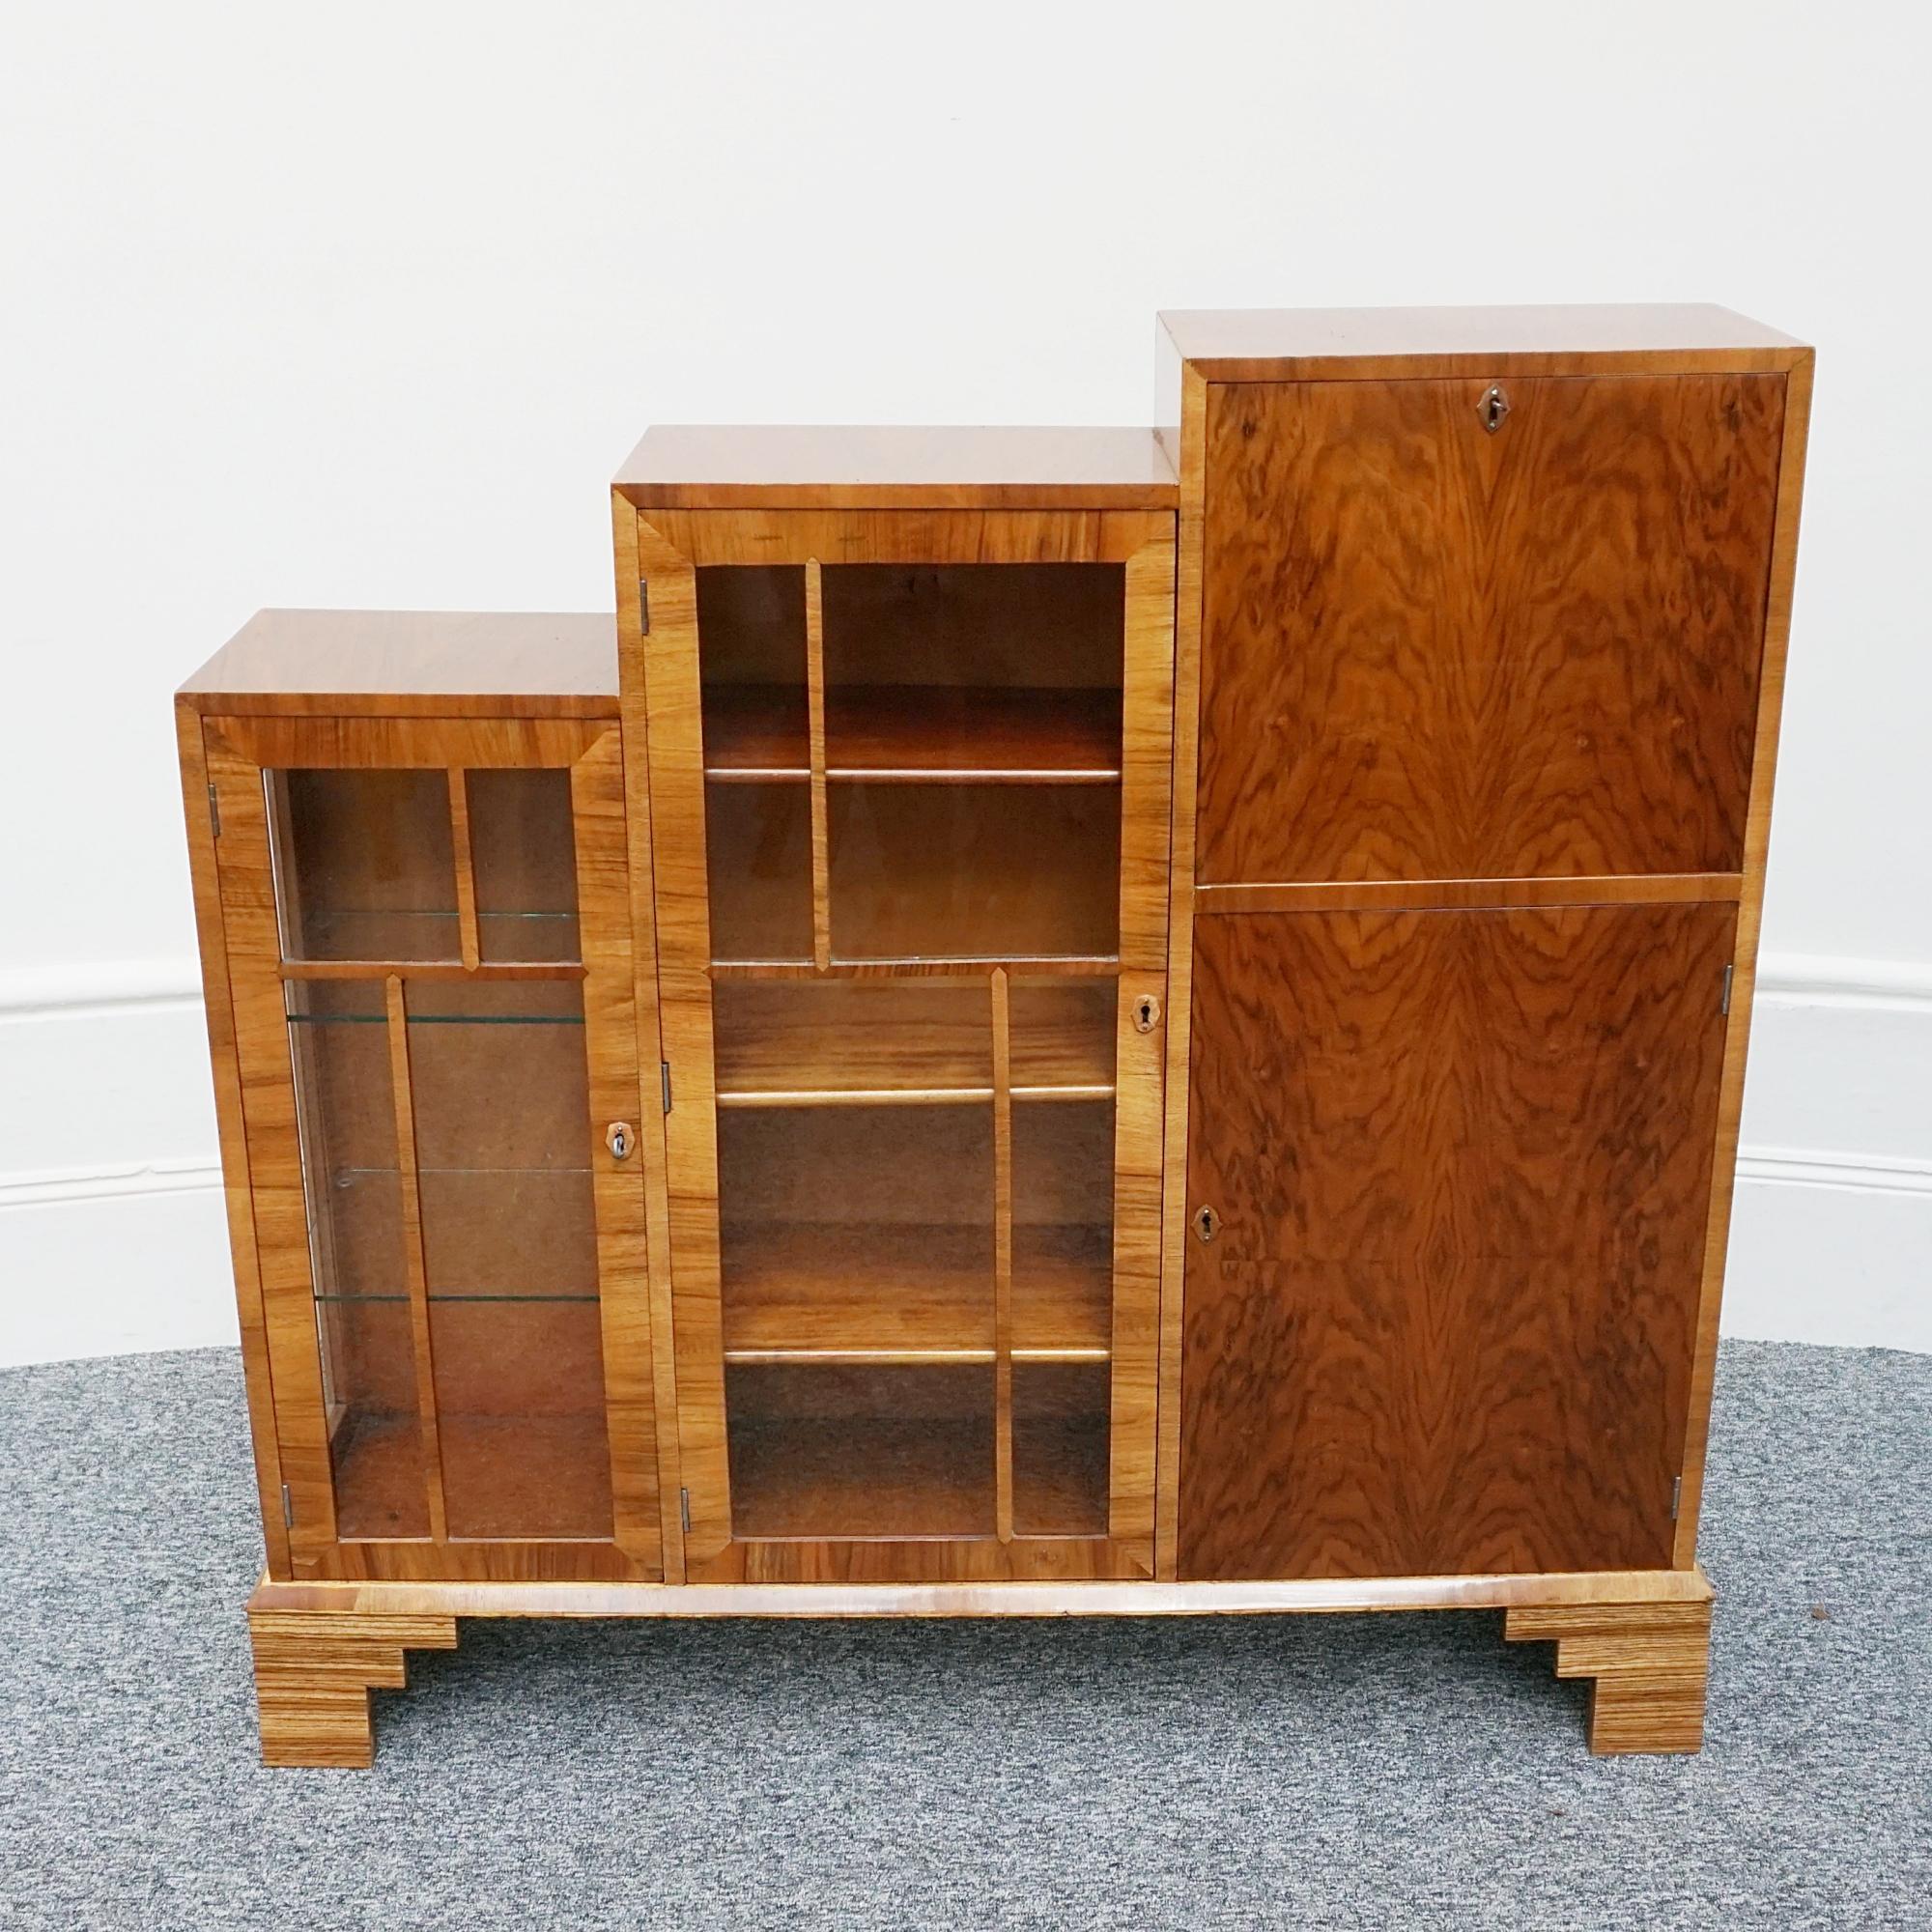 An Art Deco skyscraper bookcase/secretaire cabinet. Burr and figured walnut veneered. 

Dimensions: H 117cm W 121cm D 28cm

Origin: English

Date: Circa 1935

Item Number: 3010233

All of our furniture is extensively polished and restored where